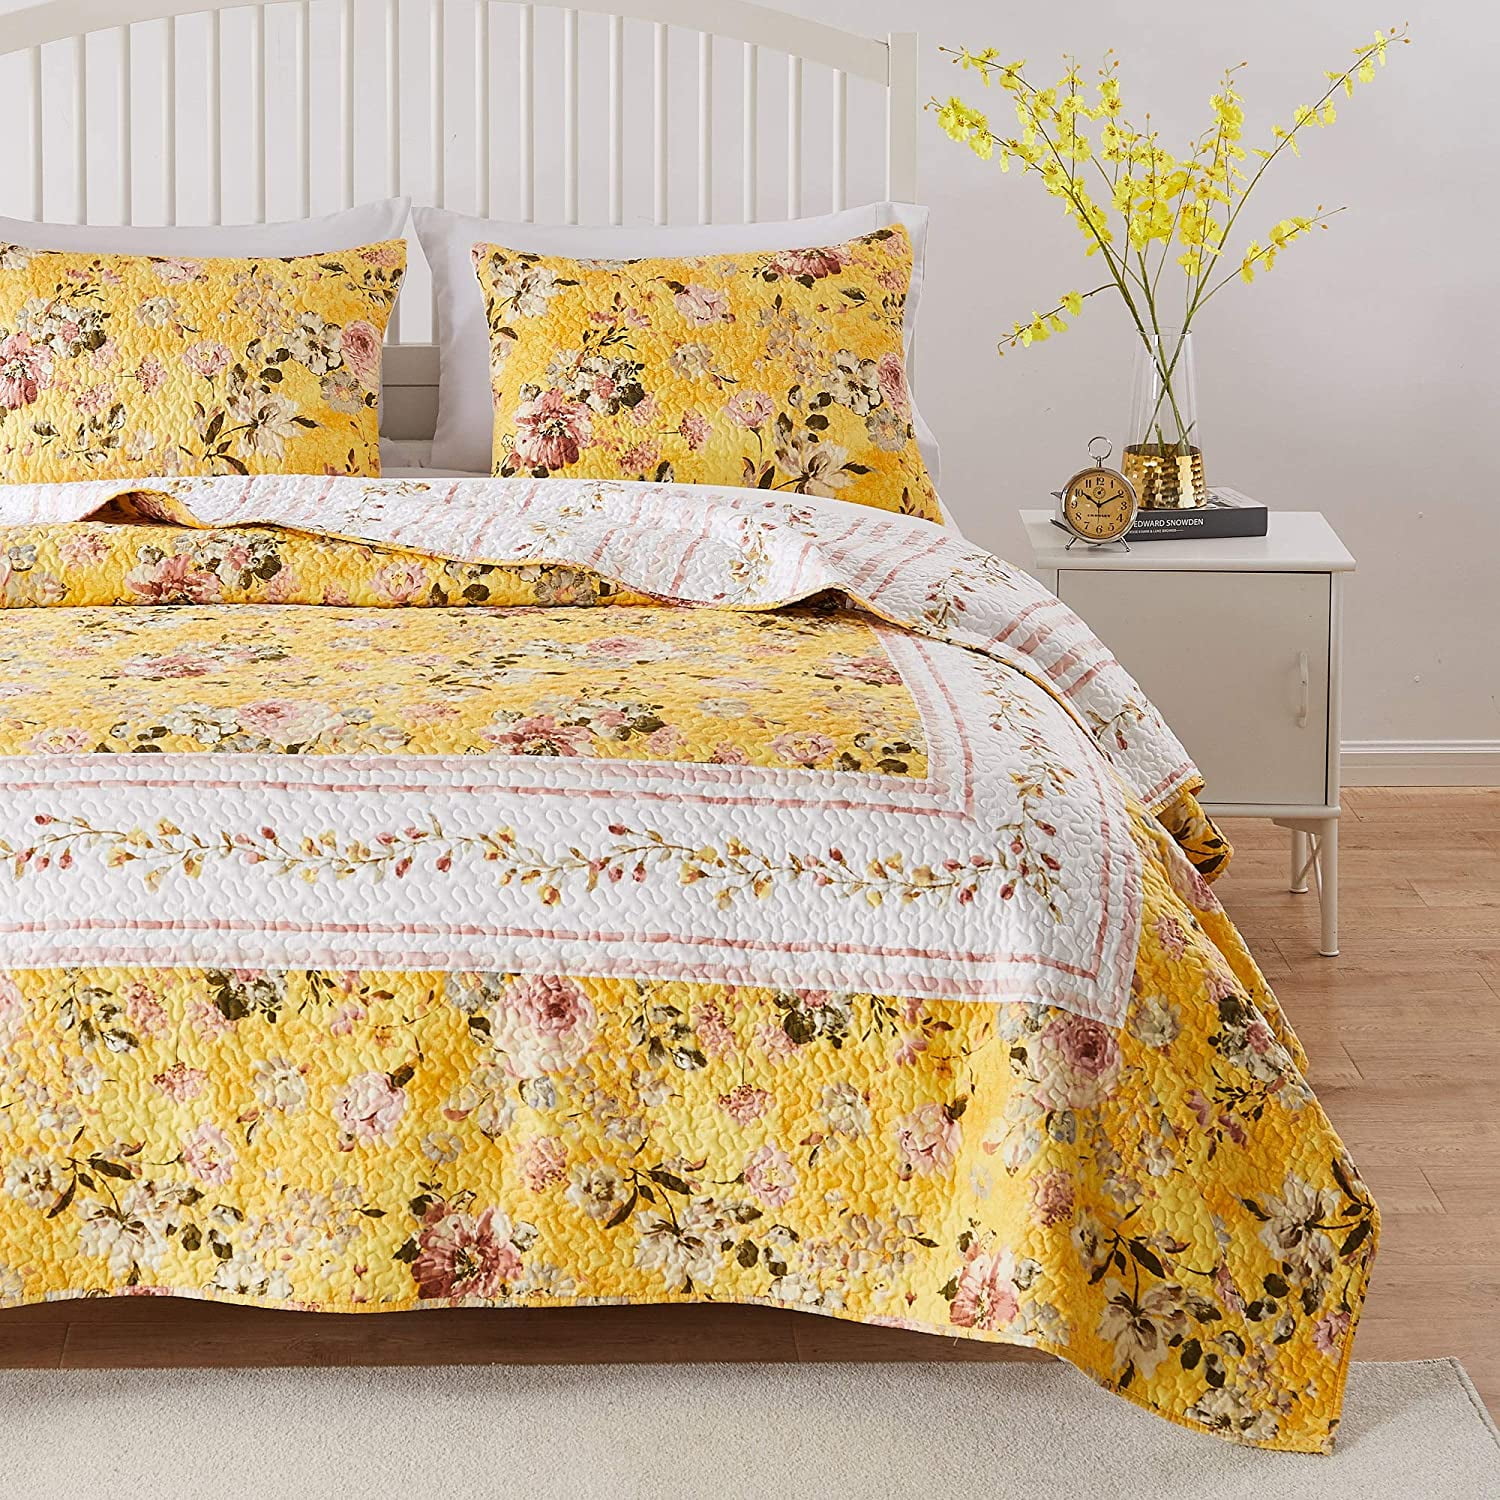 Details about   NEW ~ COZY CHIC COUNTRY COTTAGE SHABBY RED YELLOW BLUE FLORAL LEAF QUILT SET 